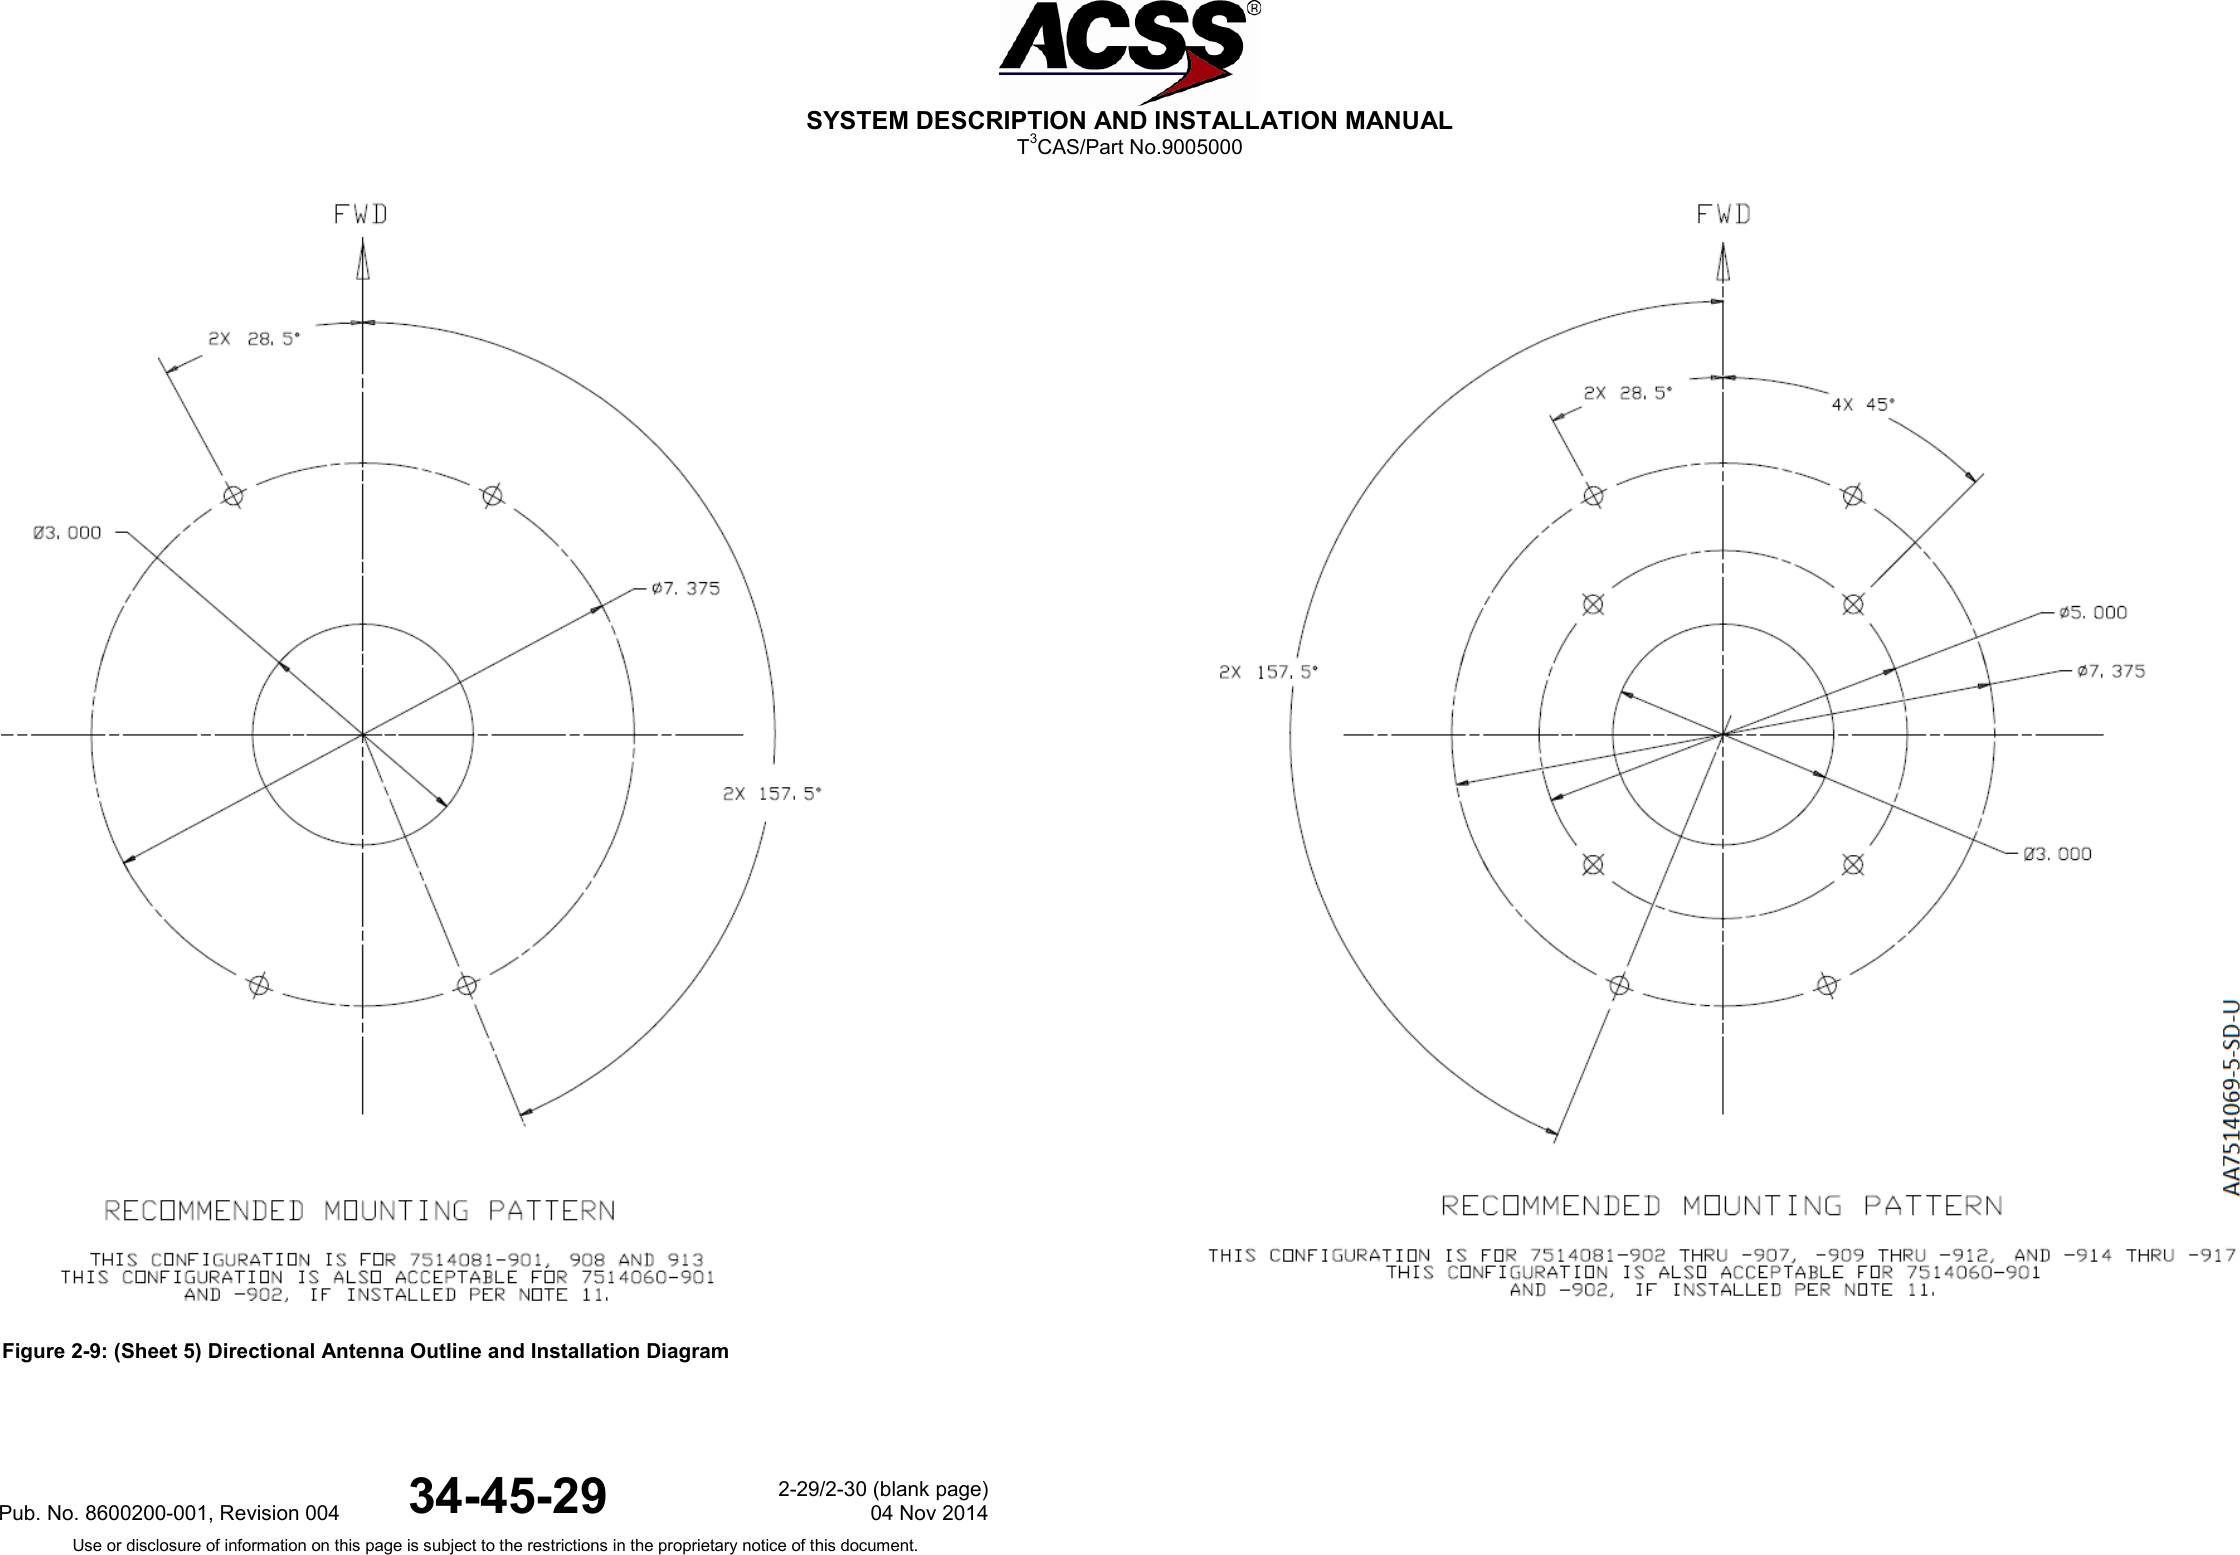  SYSTEM DESCRIPTION AND INSTALLATION MANUAL T3CAS/Part No.9005000  Figure 2-9: (Sheet 5) Directional Antenna Outline and Installation DiagramPub. No. 8600200-001, Revision 004 34-45-29 2-29/2-30 (blank page) 04 Nov 2014 Use or disclosure of information on this page is subject to the restrictions in the proprietary notice of this document.  